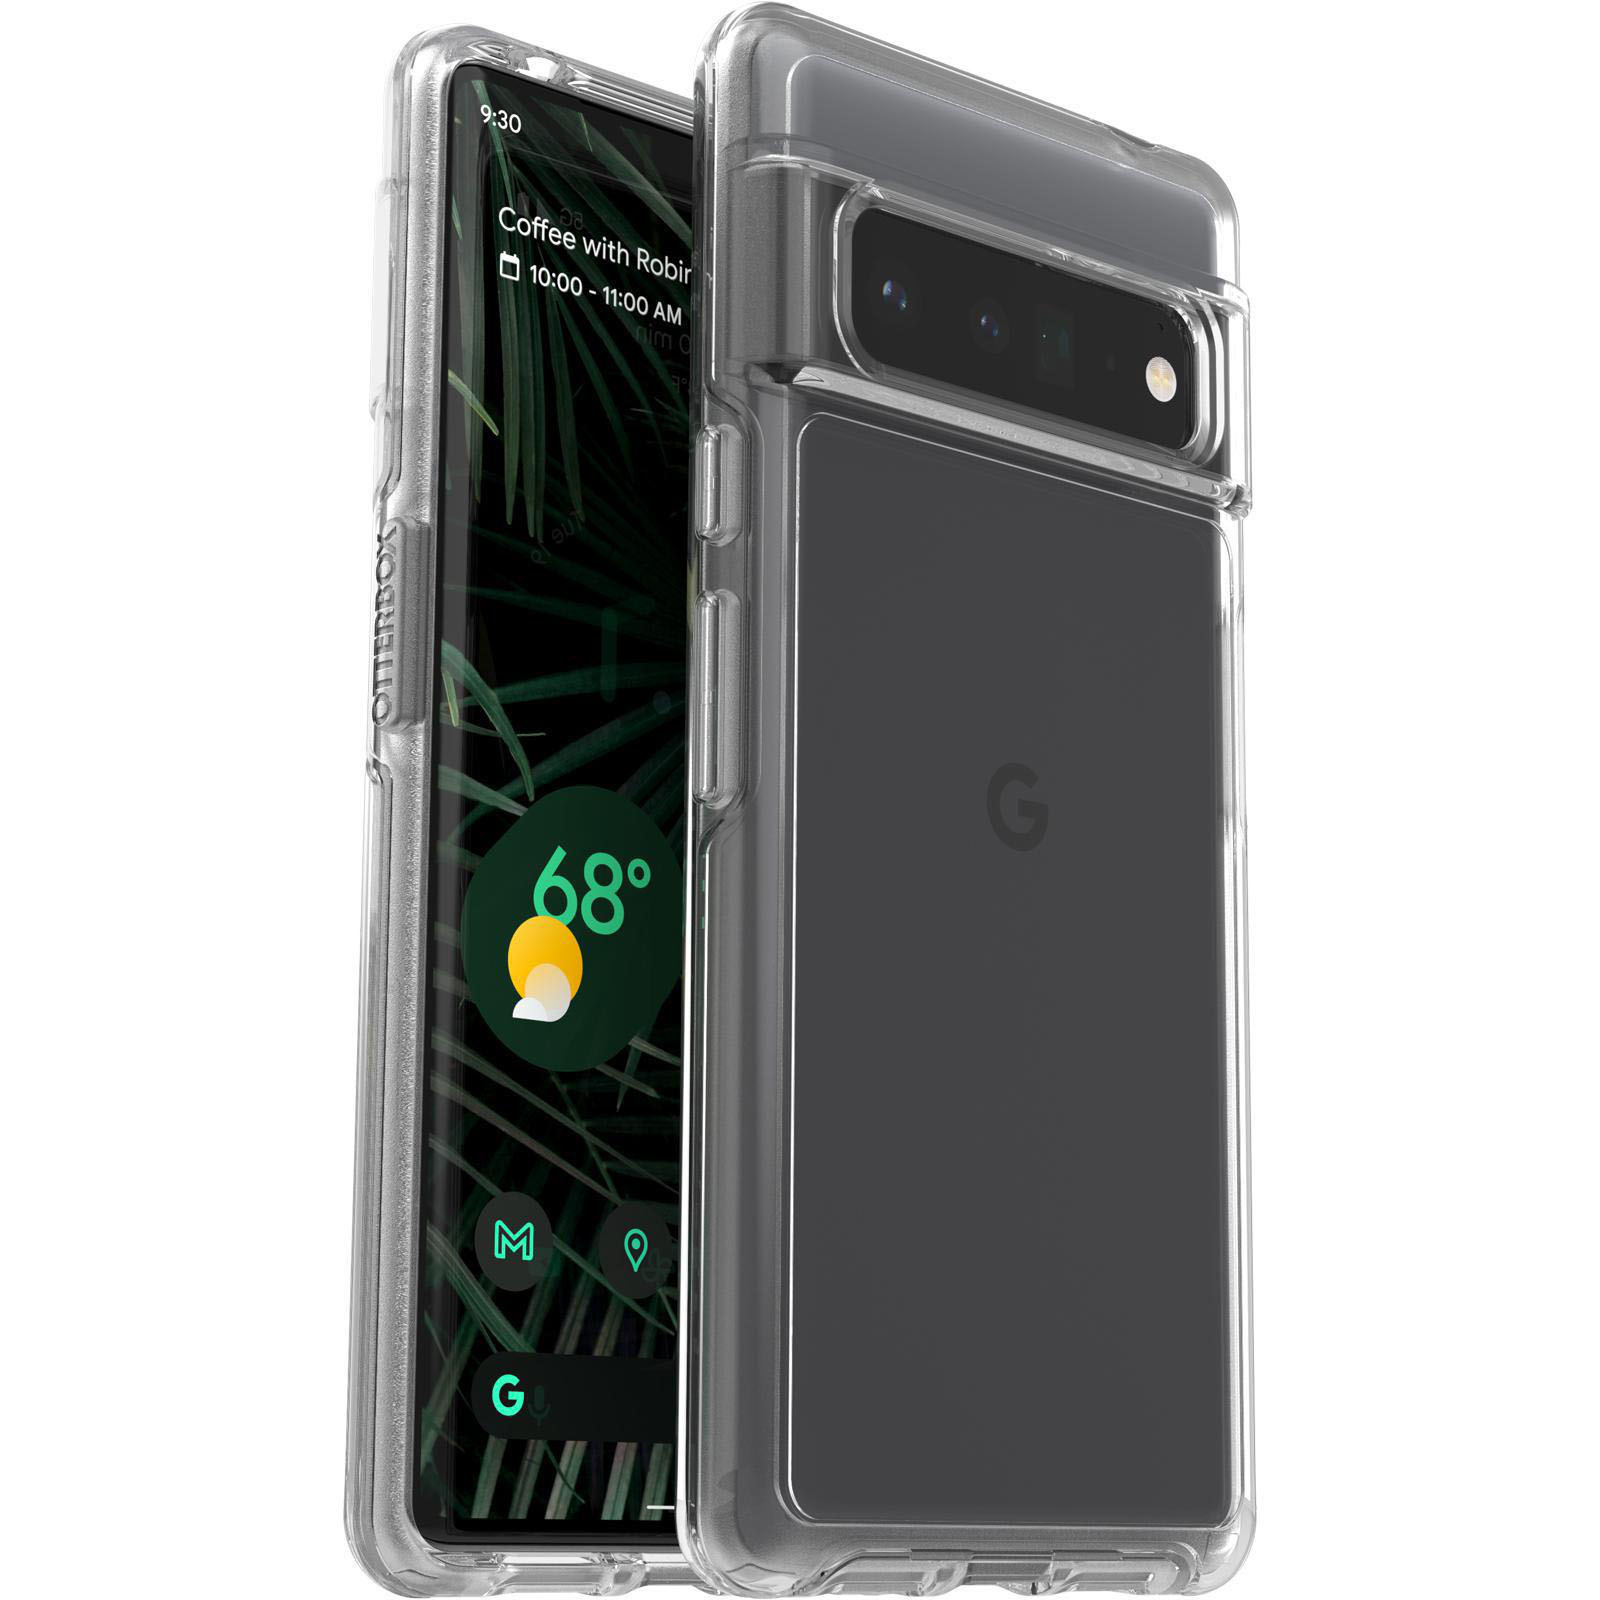 Backcover, Pixel 6 Symmetry Google, Clear Series, OTTERBOX Pro,